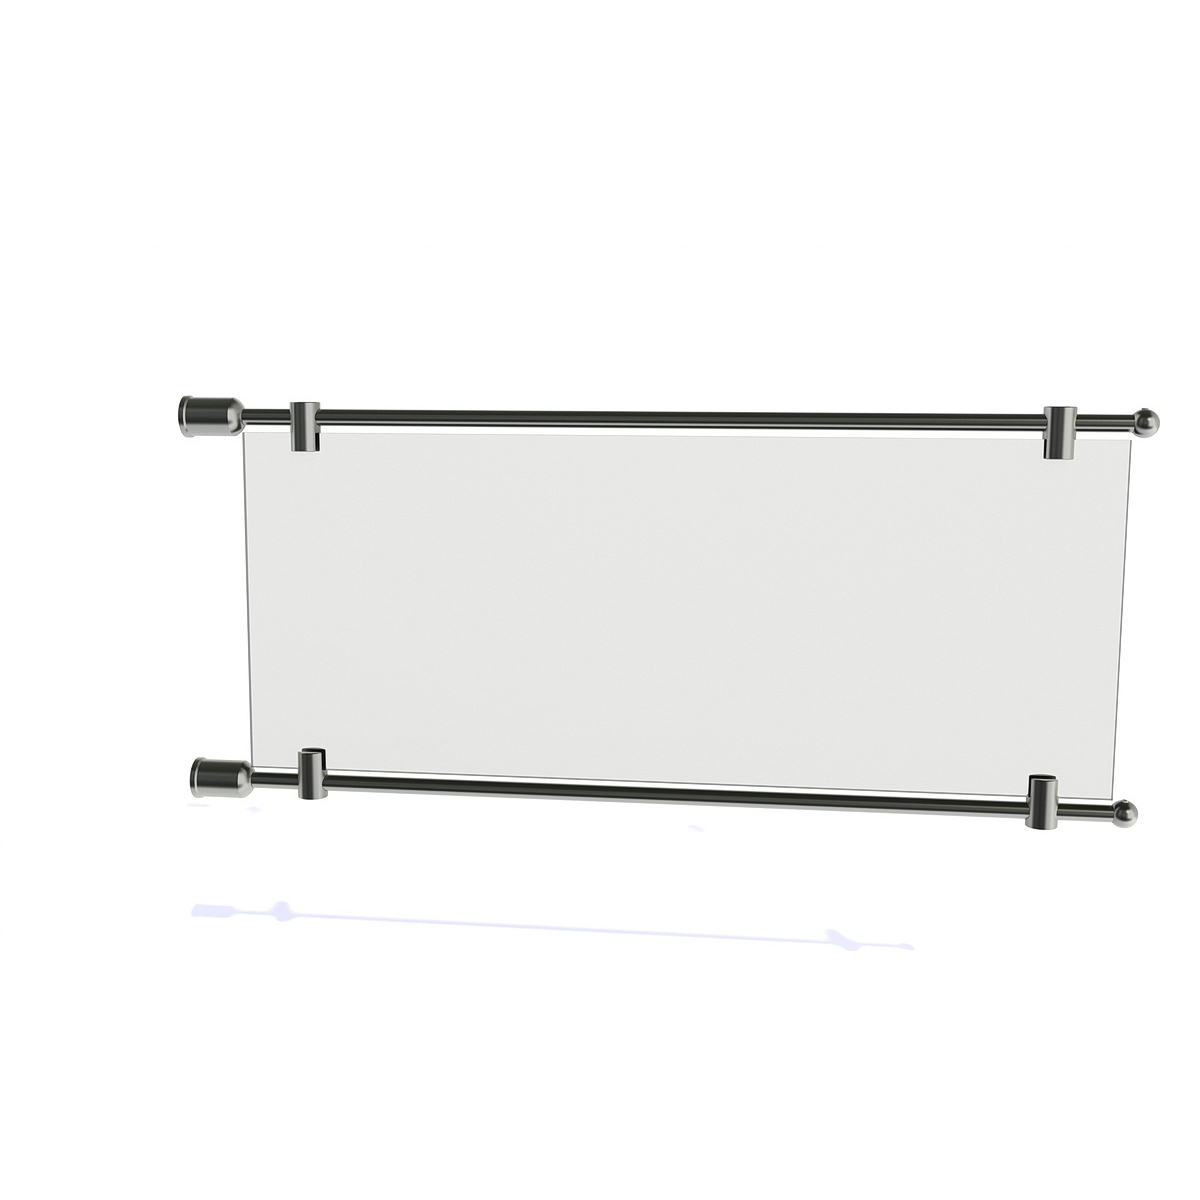 Set of 2, 3/8'' Diameter Rod Projecting Sign, Aluminum Clear Anodized, 21 13/16''. Material thickness up to 5/16''